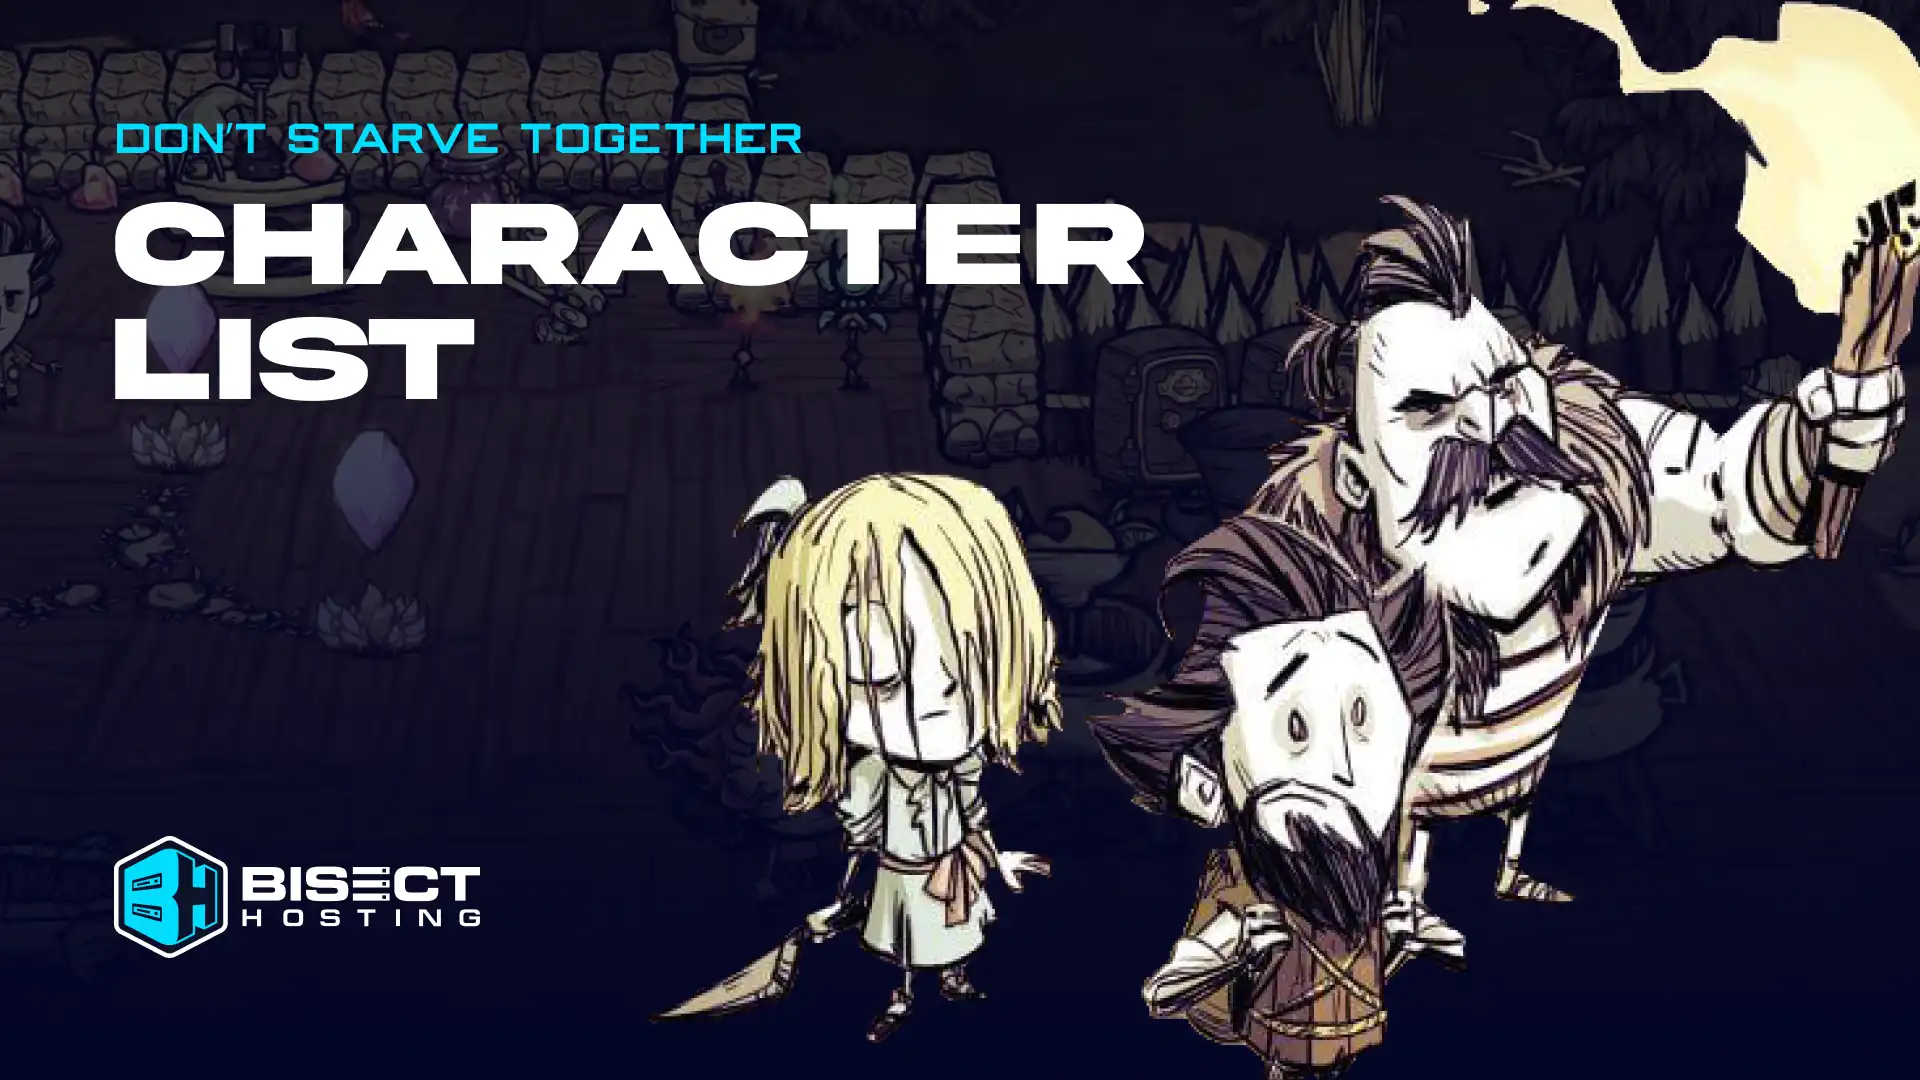 Don’t Starve Together NPCs Guide: Every NPC and What They Do